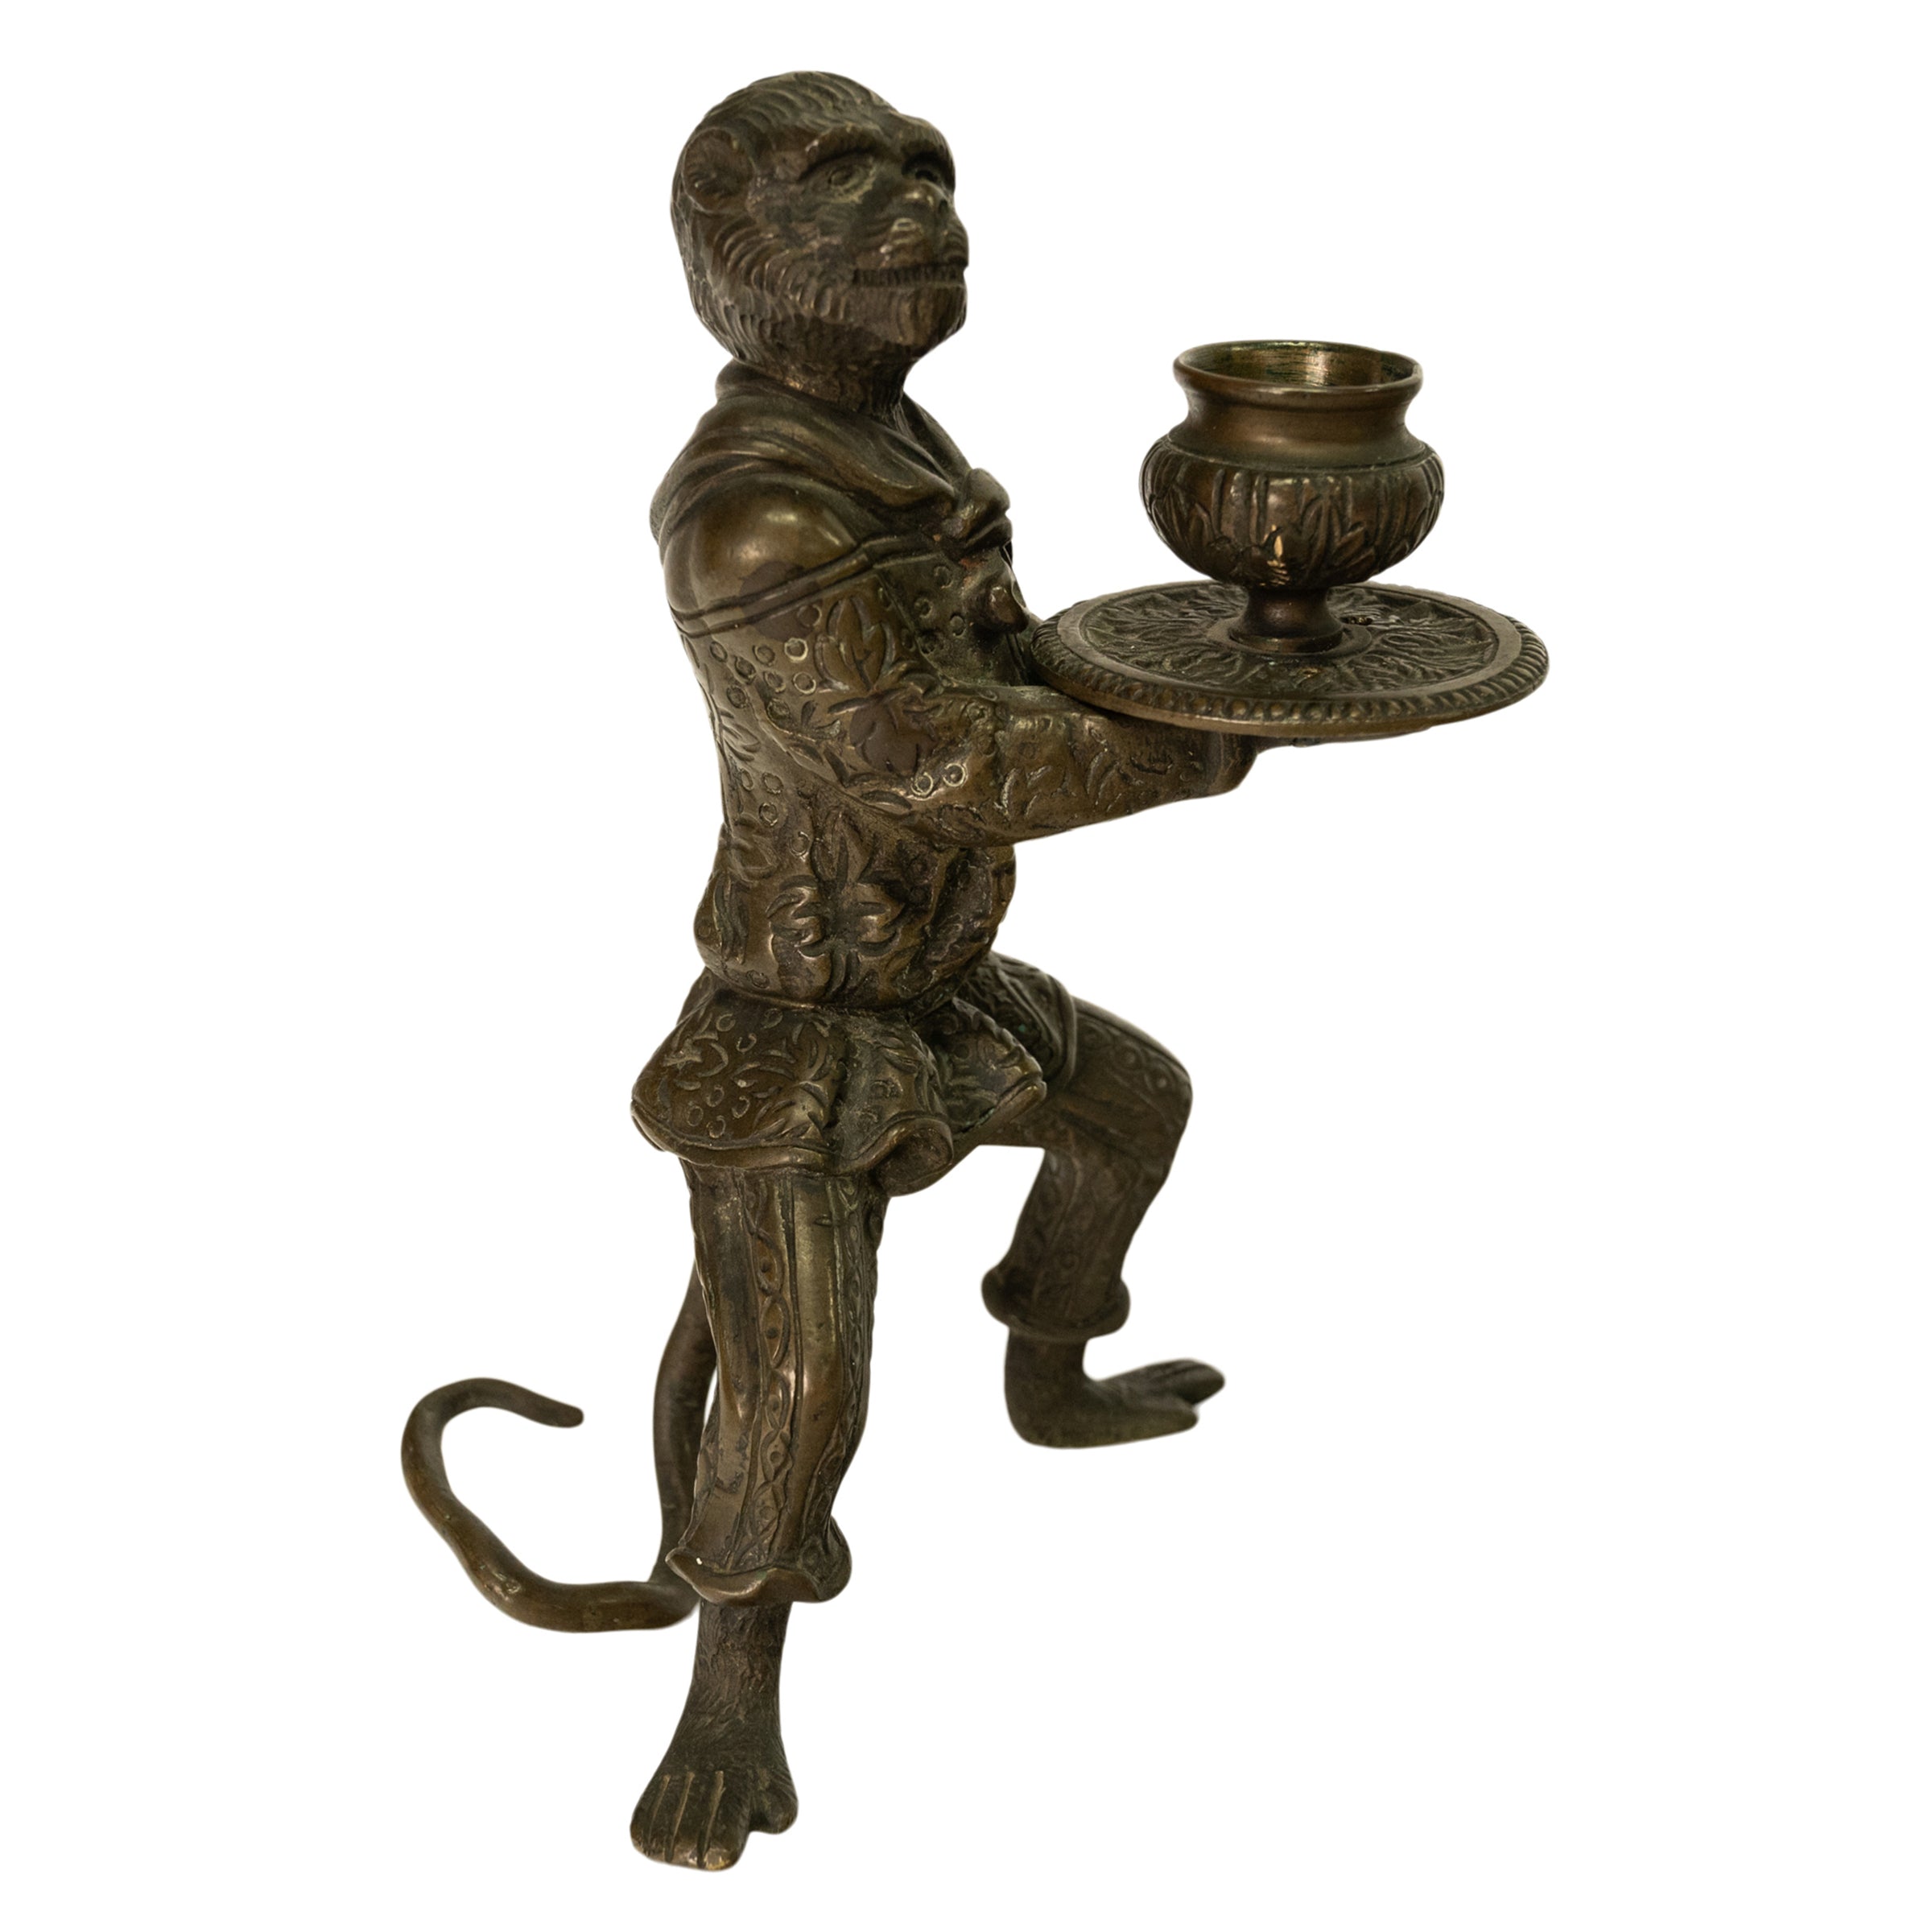 A Small Brass Candlestick with Monkey Mount by Kinco, England, 9cm